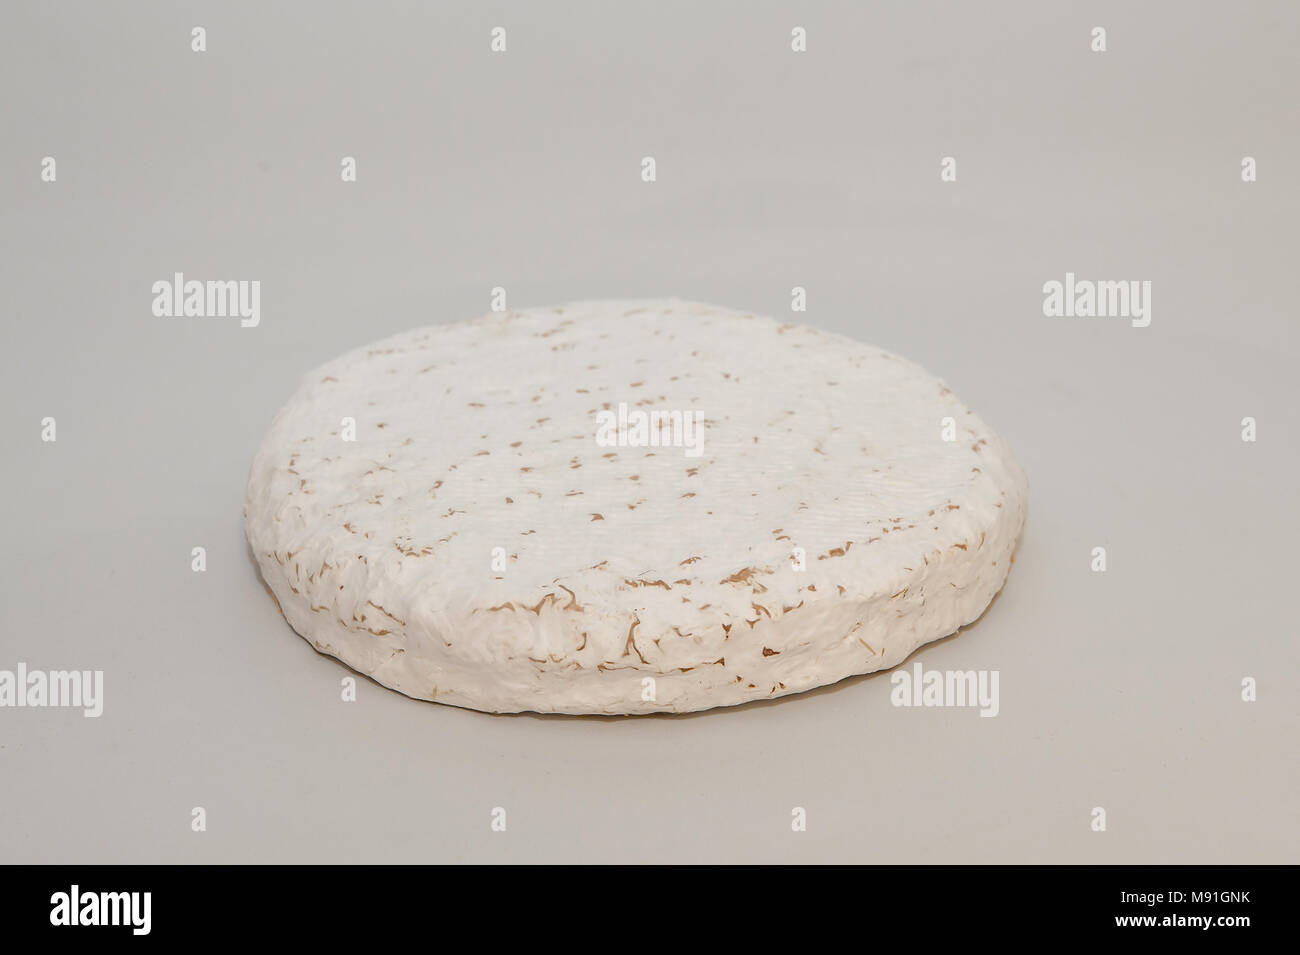 Vegetarian French cheese Brie de Melun Stock Photo